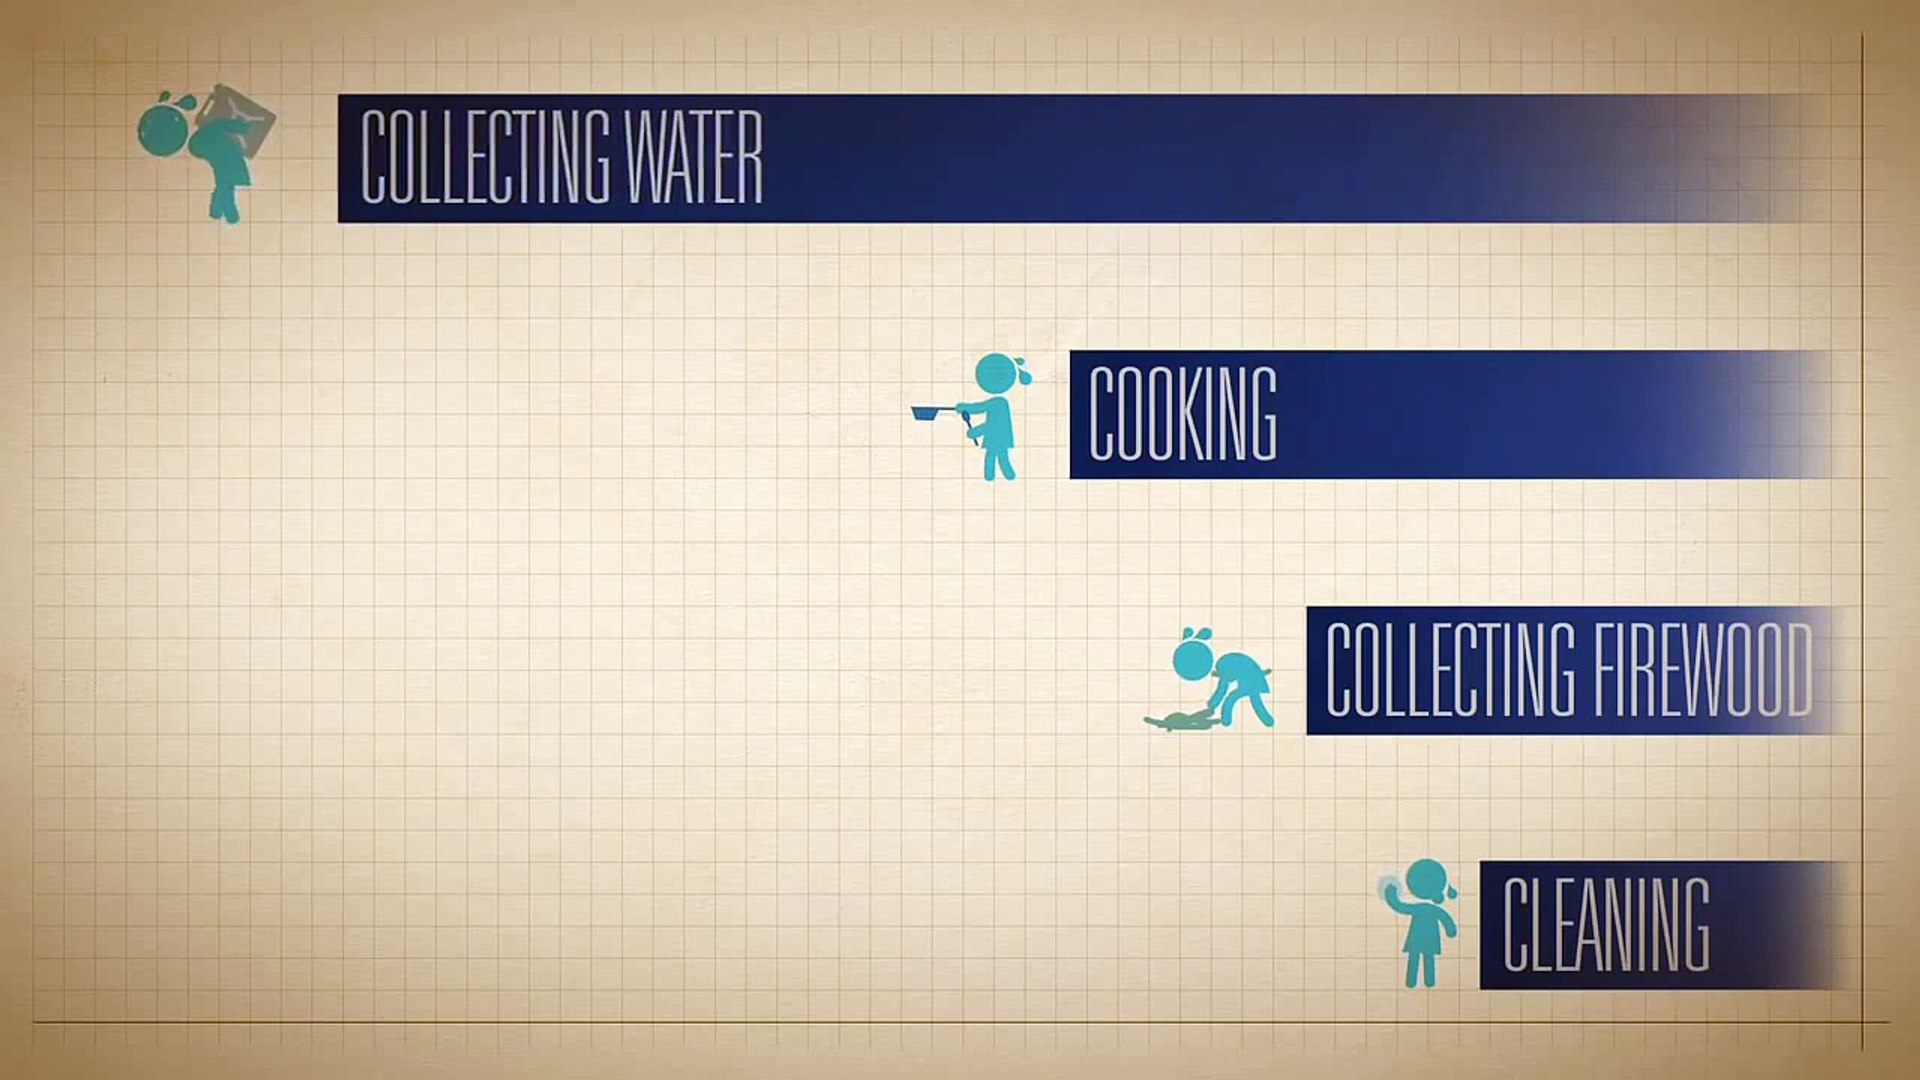 Water Changes Everything | Water Campaign 2015